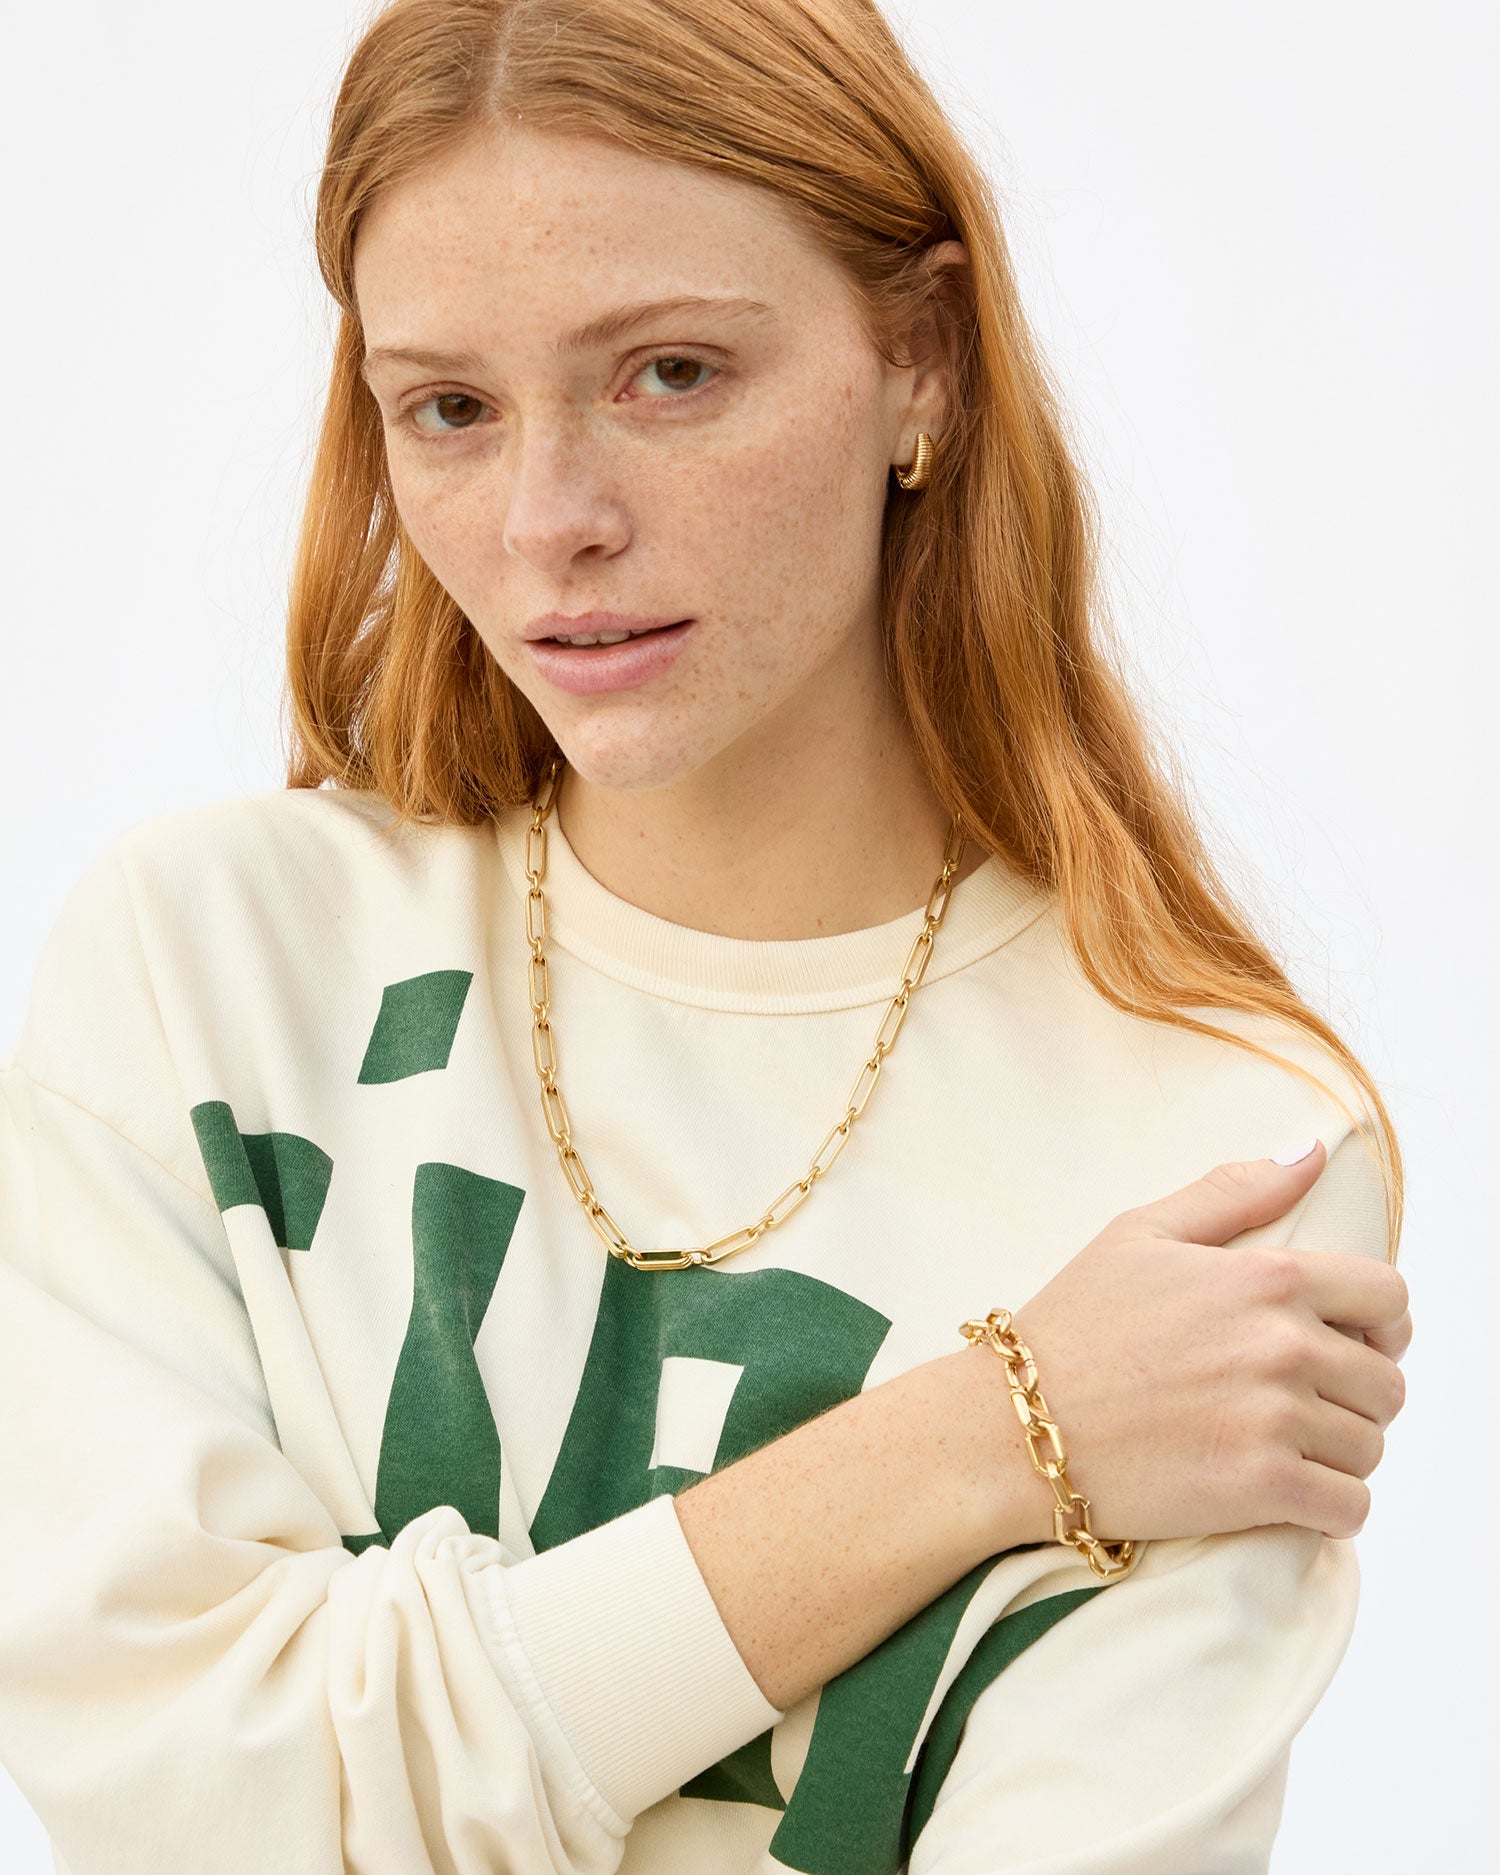 haley wearing the Vintage Gold Book Chain Necklace over the cream ciao oversized sweatshirt